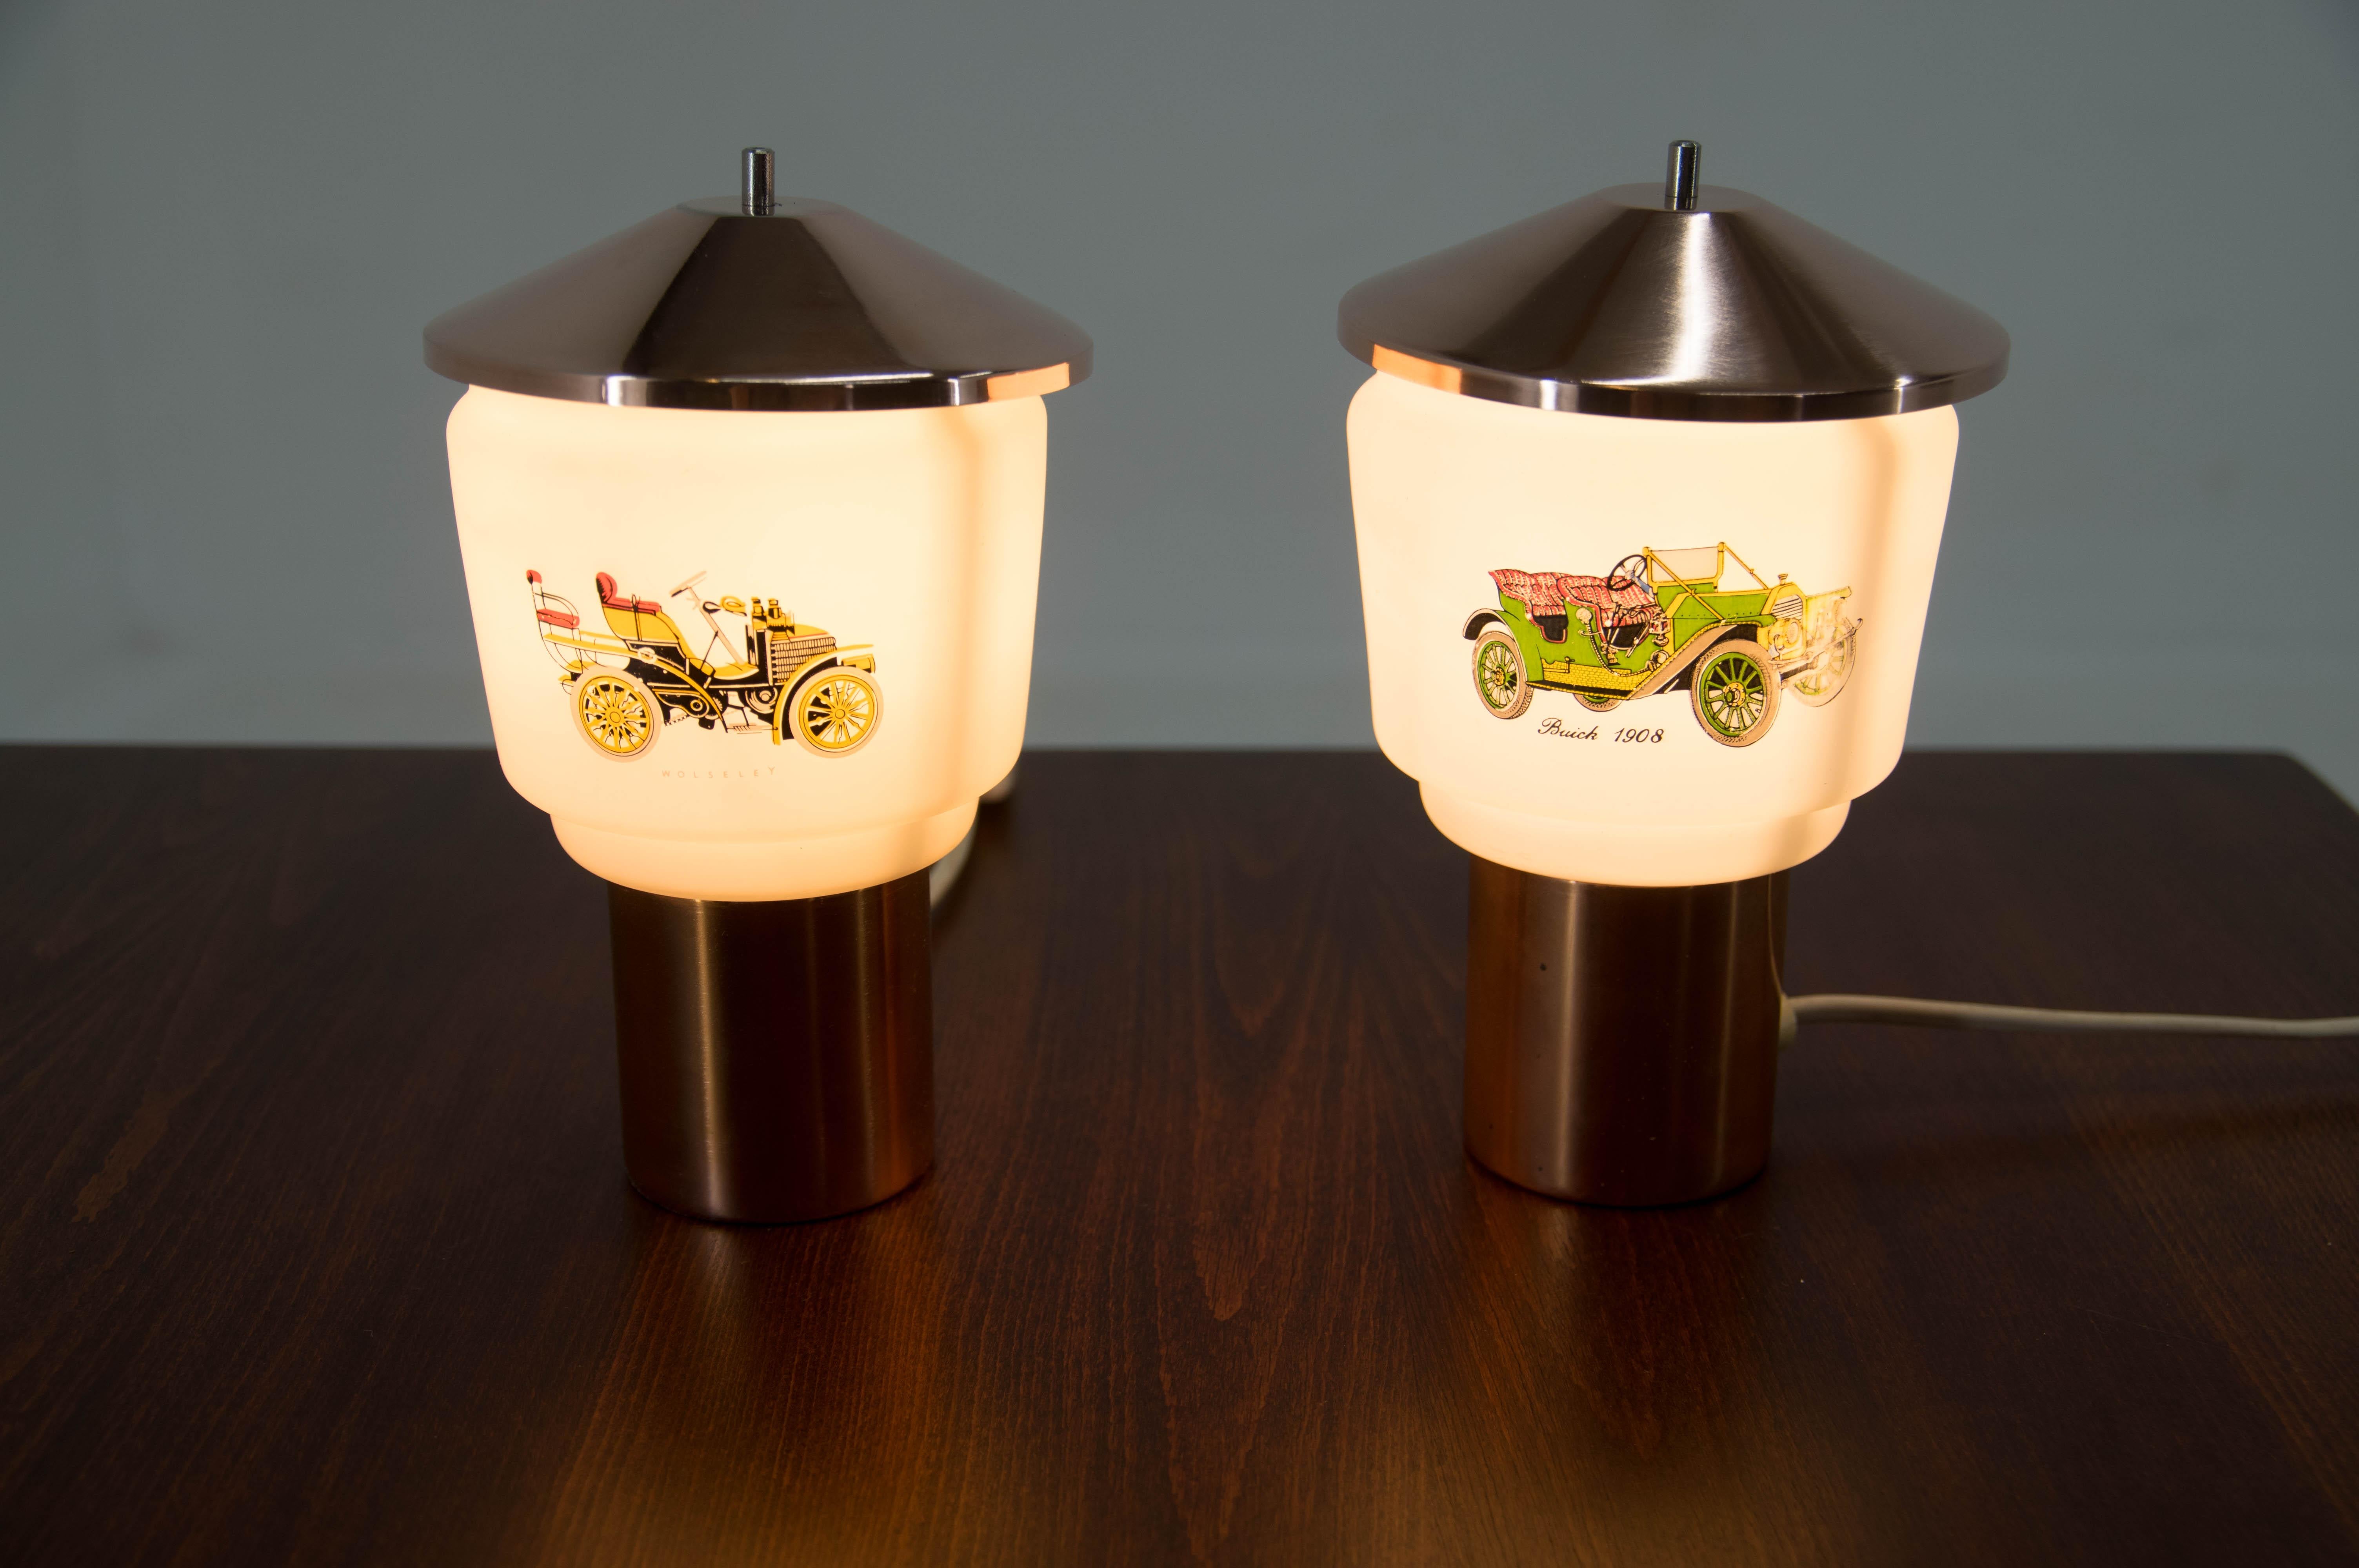 Two lamps with veteran car pictures on glass shades.
Made in Czechoslovakia by Lustry Kamenicky Senov
Original condition - polished.
1x40W, E25-E27 socket
US wiring compatible